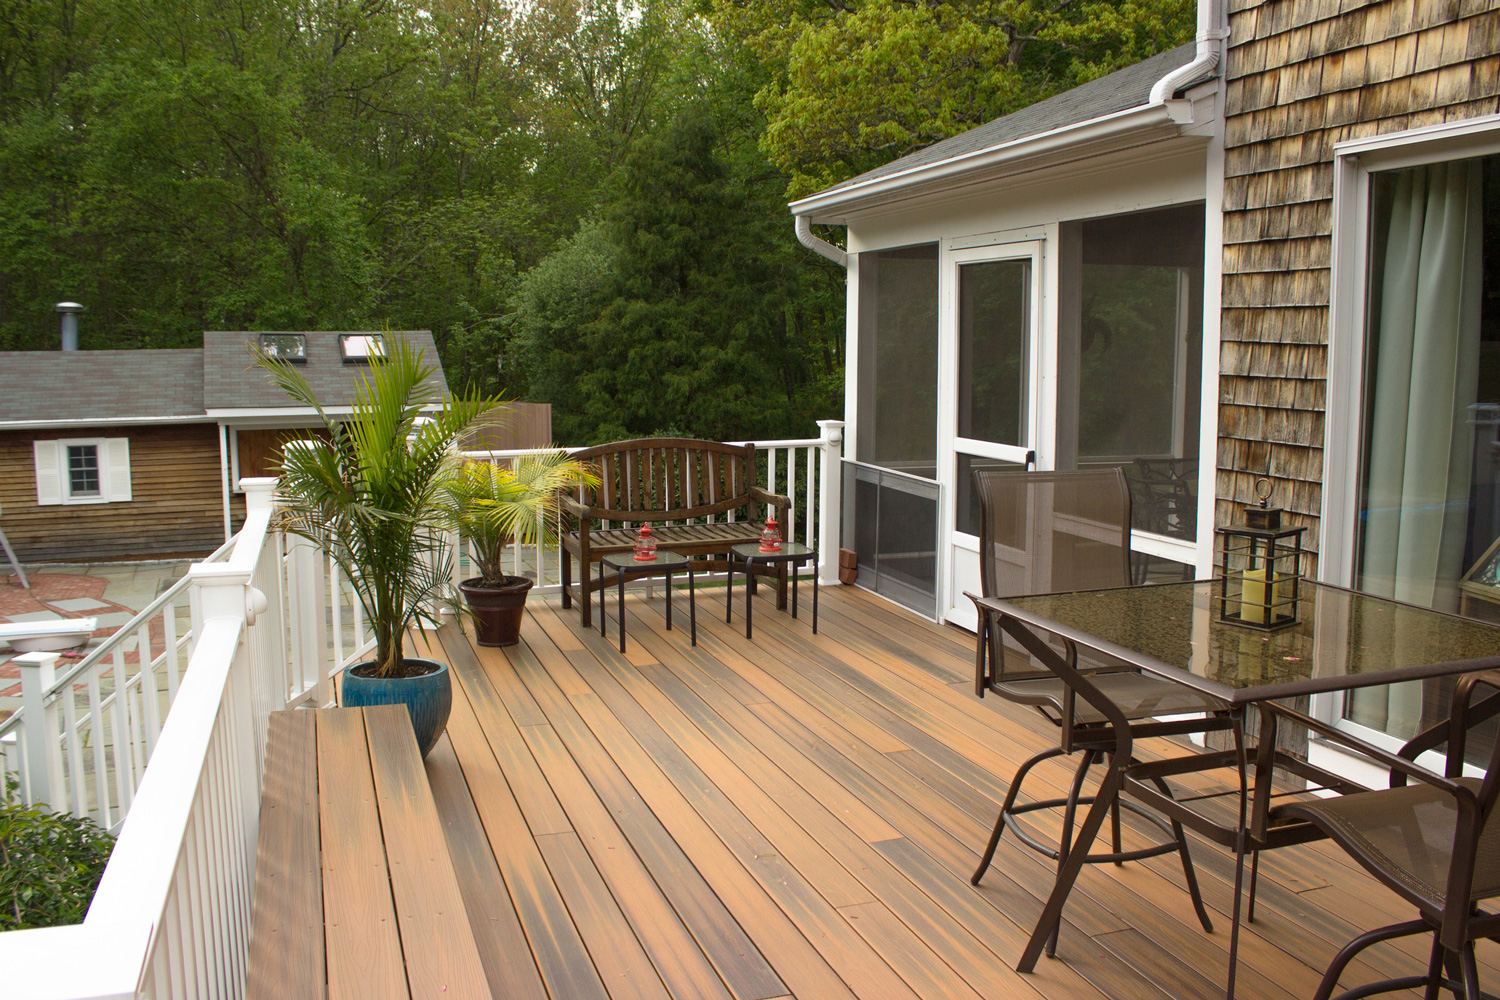 A well put together outdoor deck